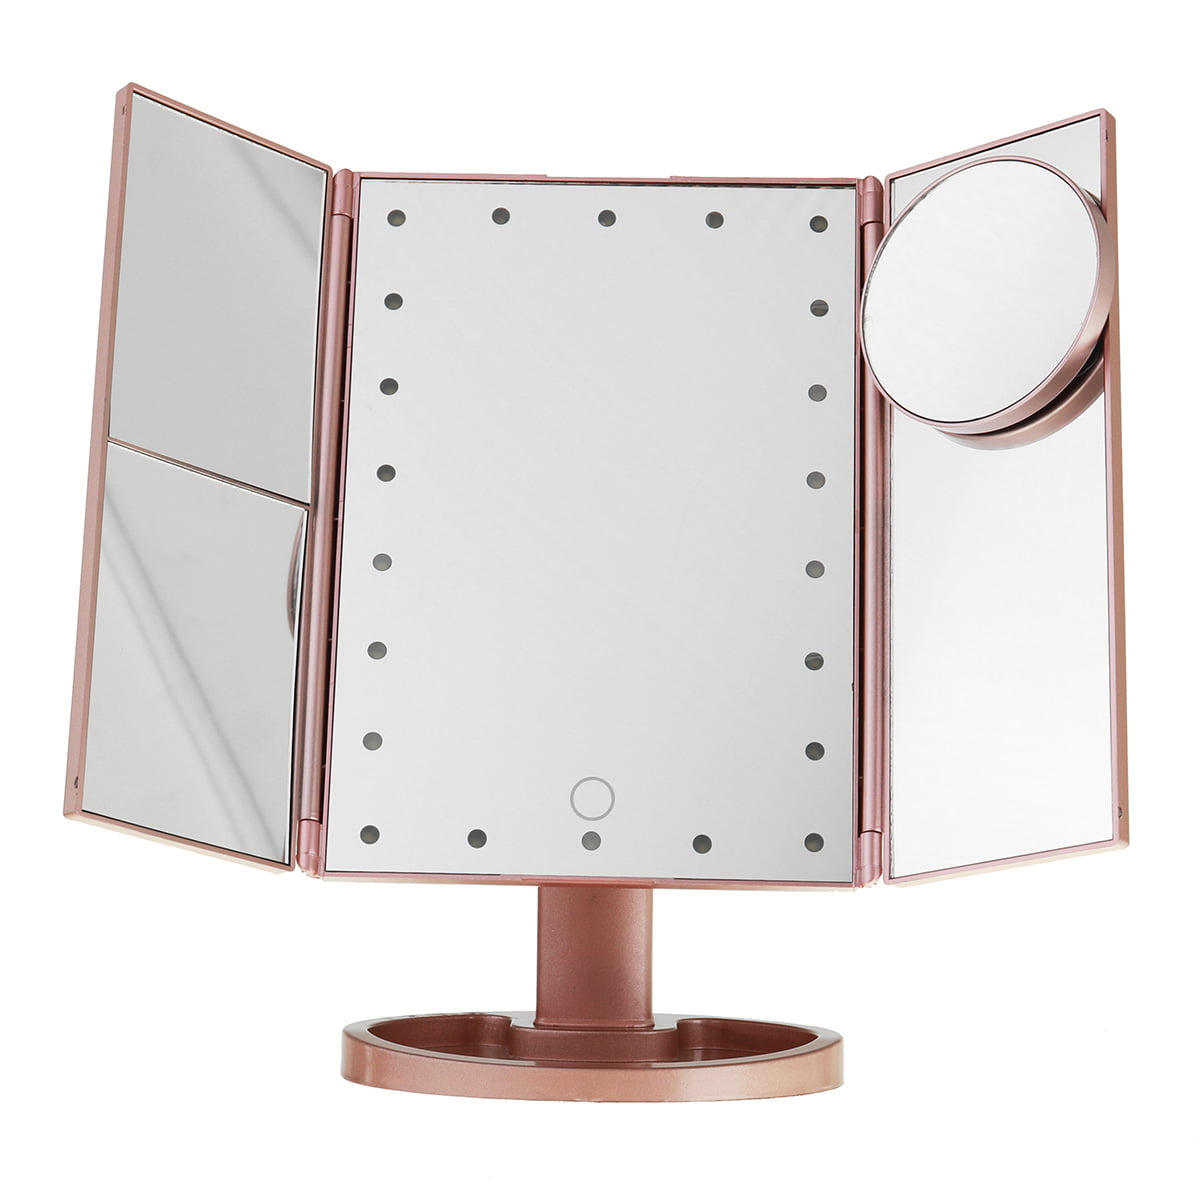 TriFold Lighted Vanity Mirror with 21 LED Lights, Touch